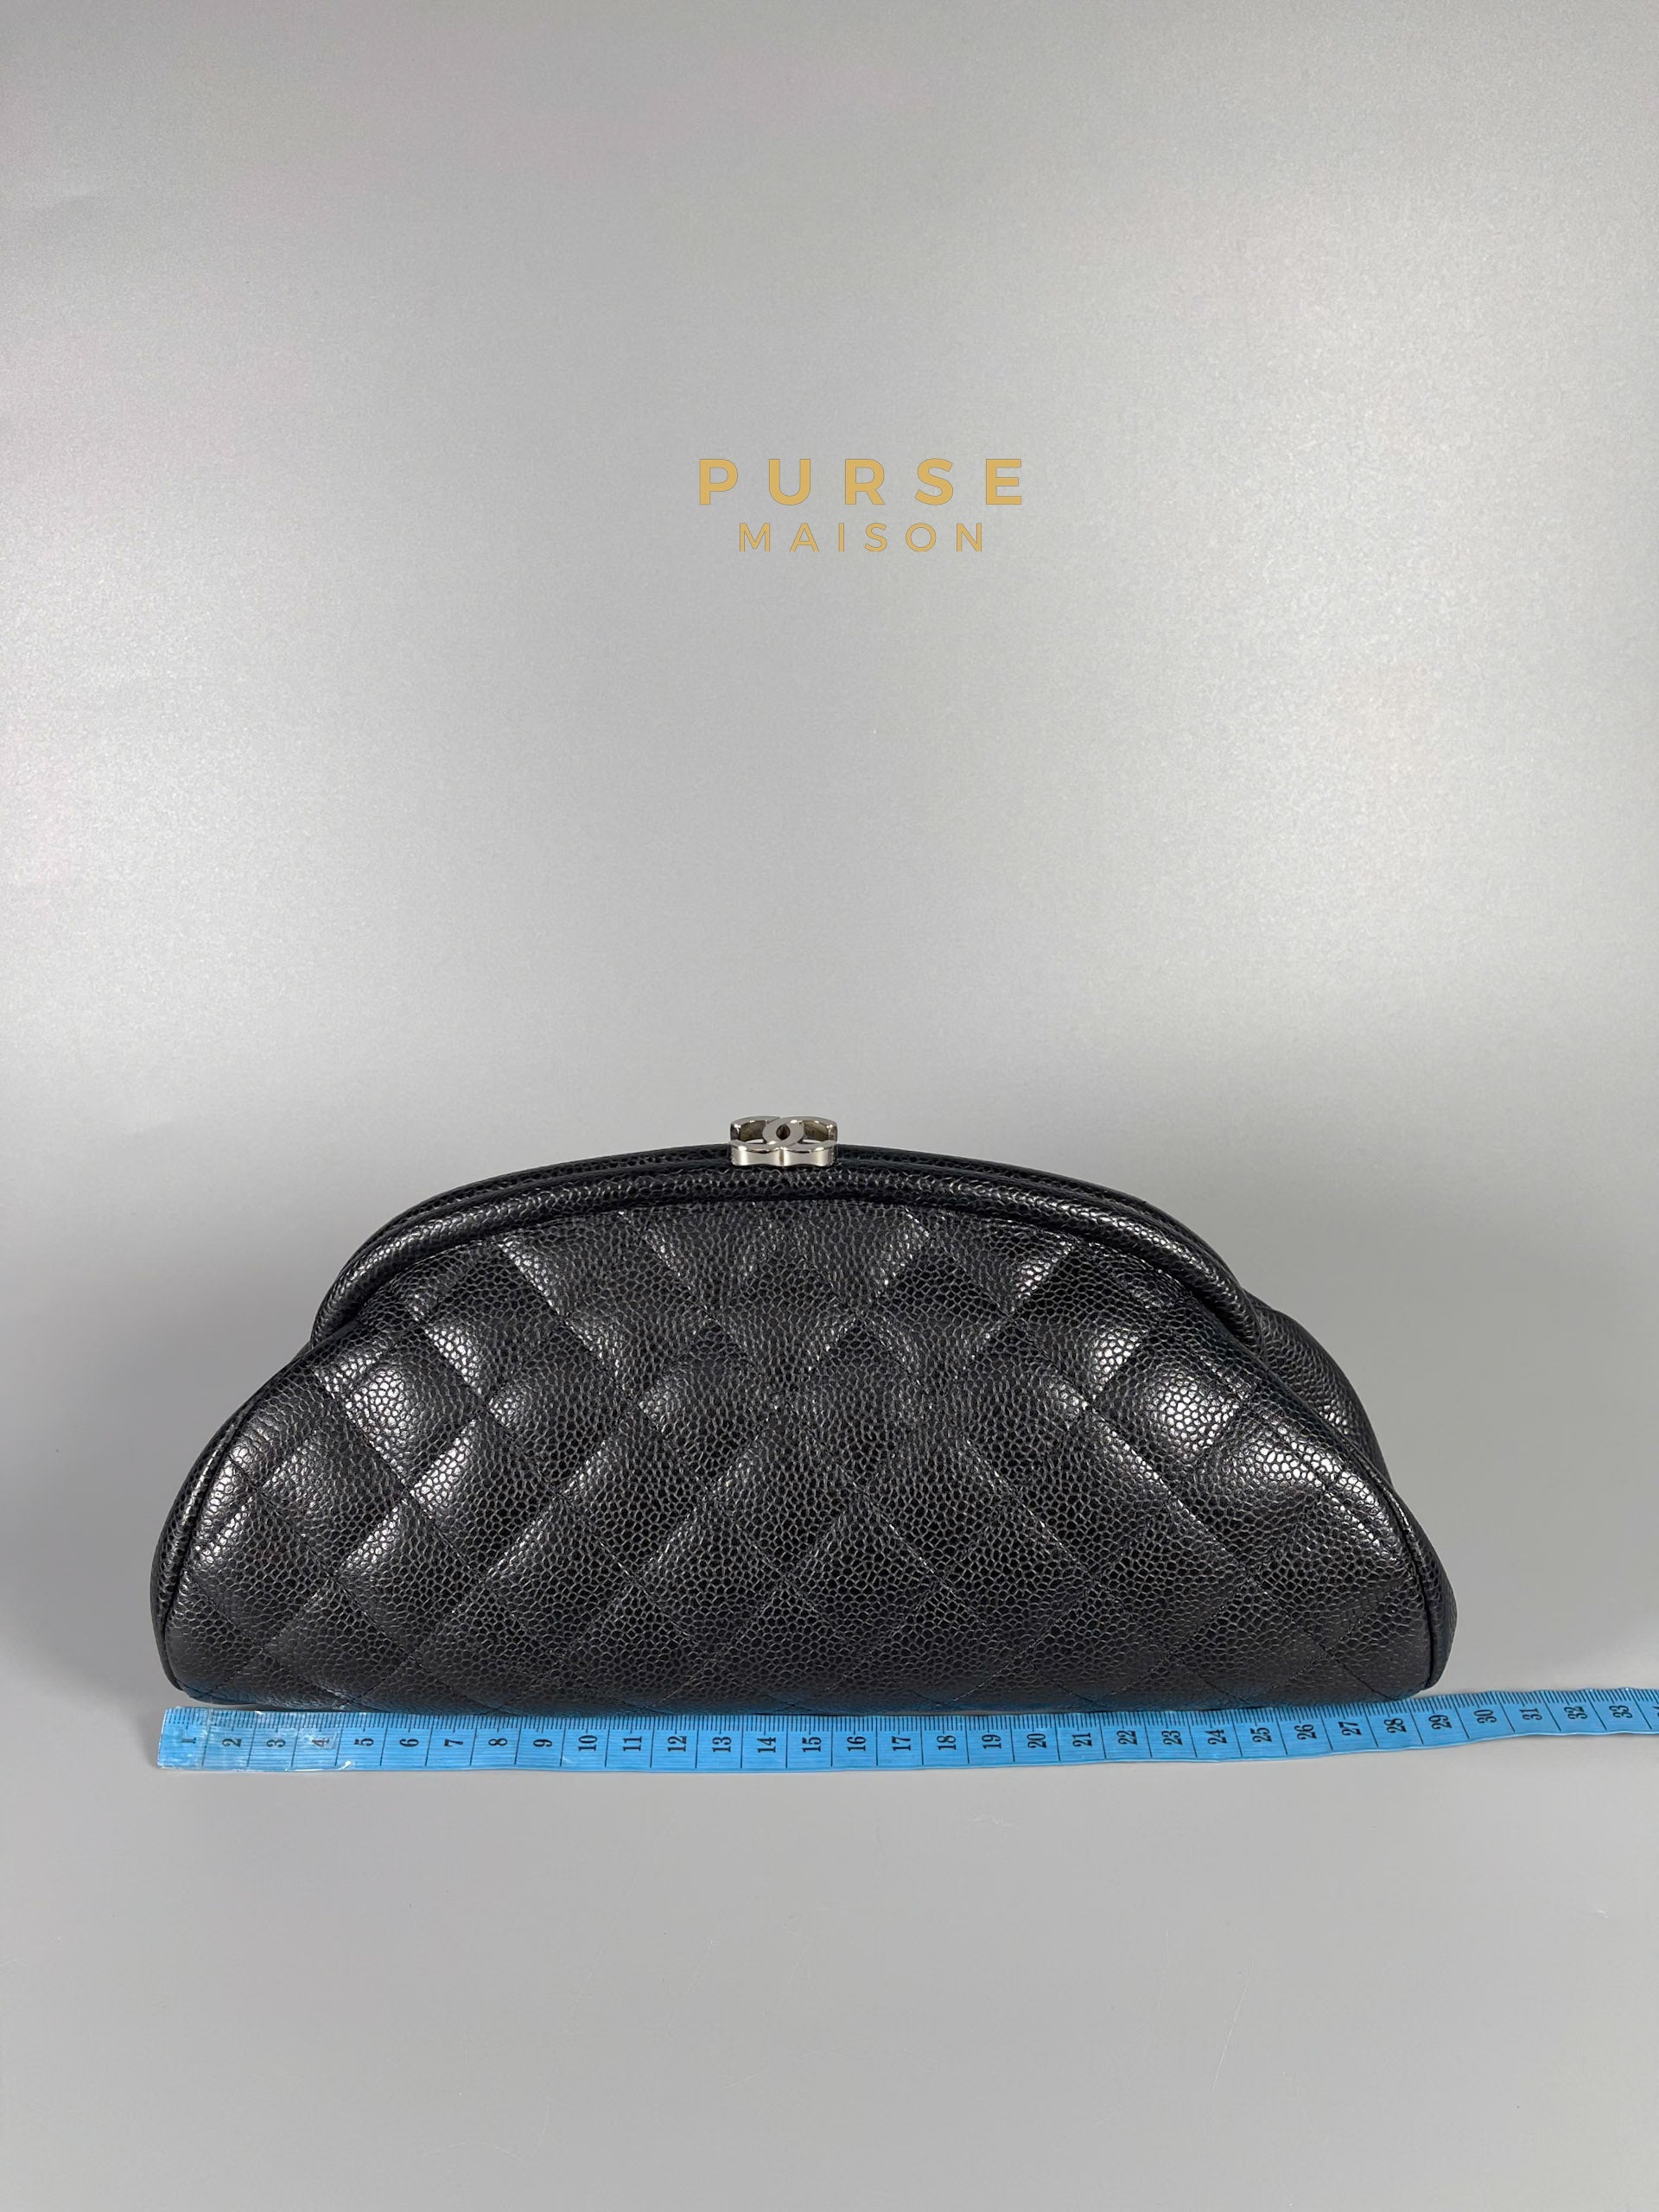 Chanel CC Clutch in Black Quilted Caviar Series 13 | Purse Maison Luxury Bags Shop